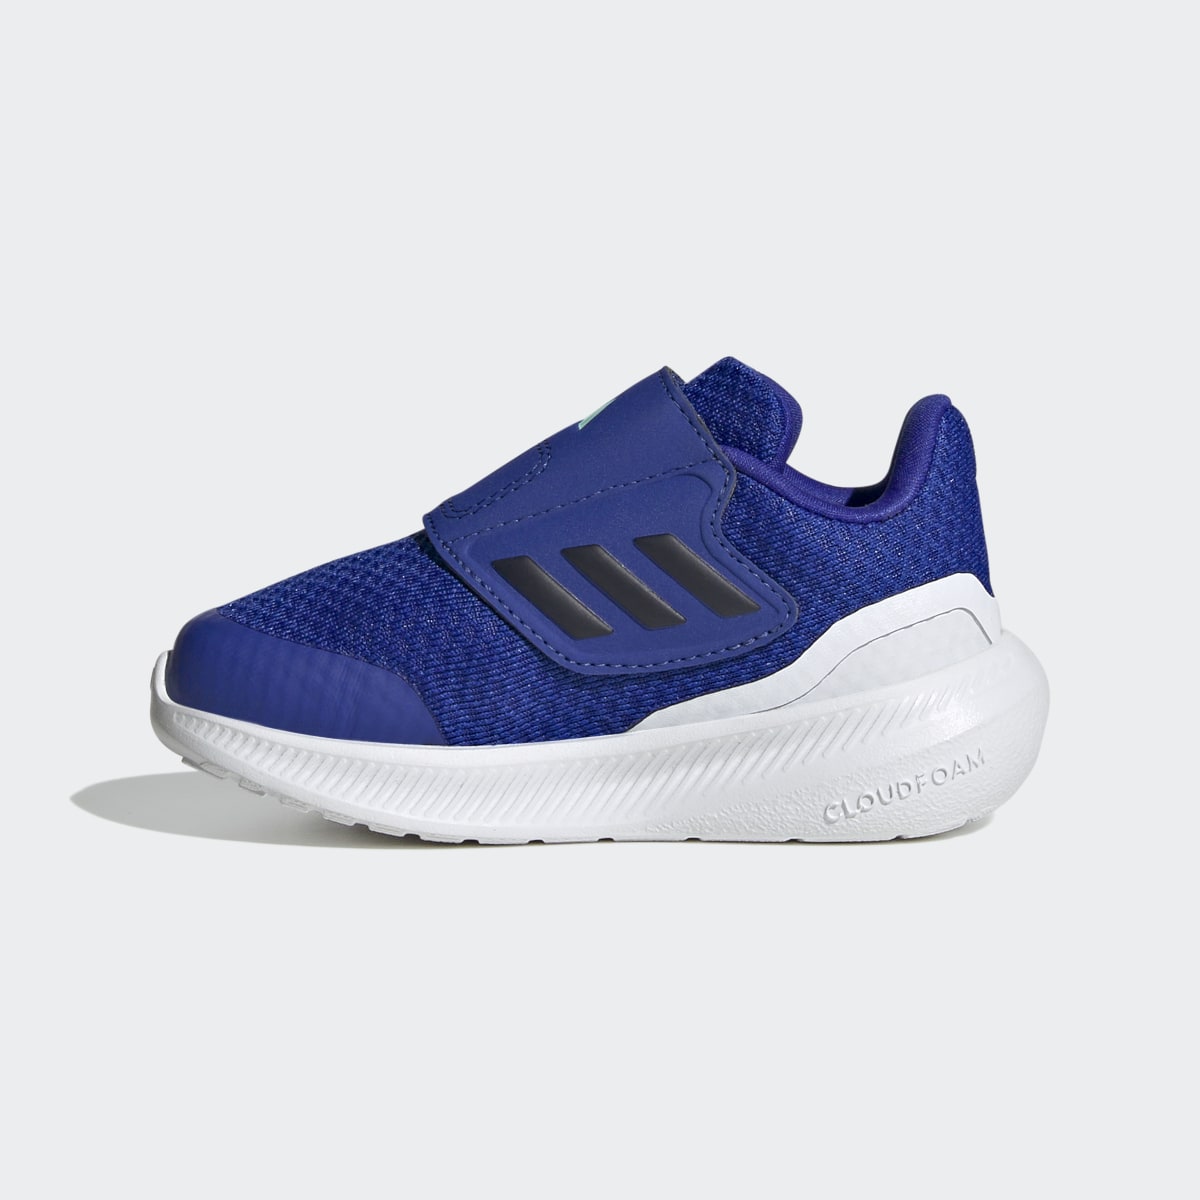 Adidas Runfalcon 3.0 Sport Running Hook-and-Loop Shoes. 7